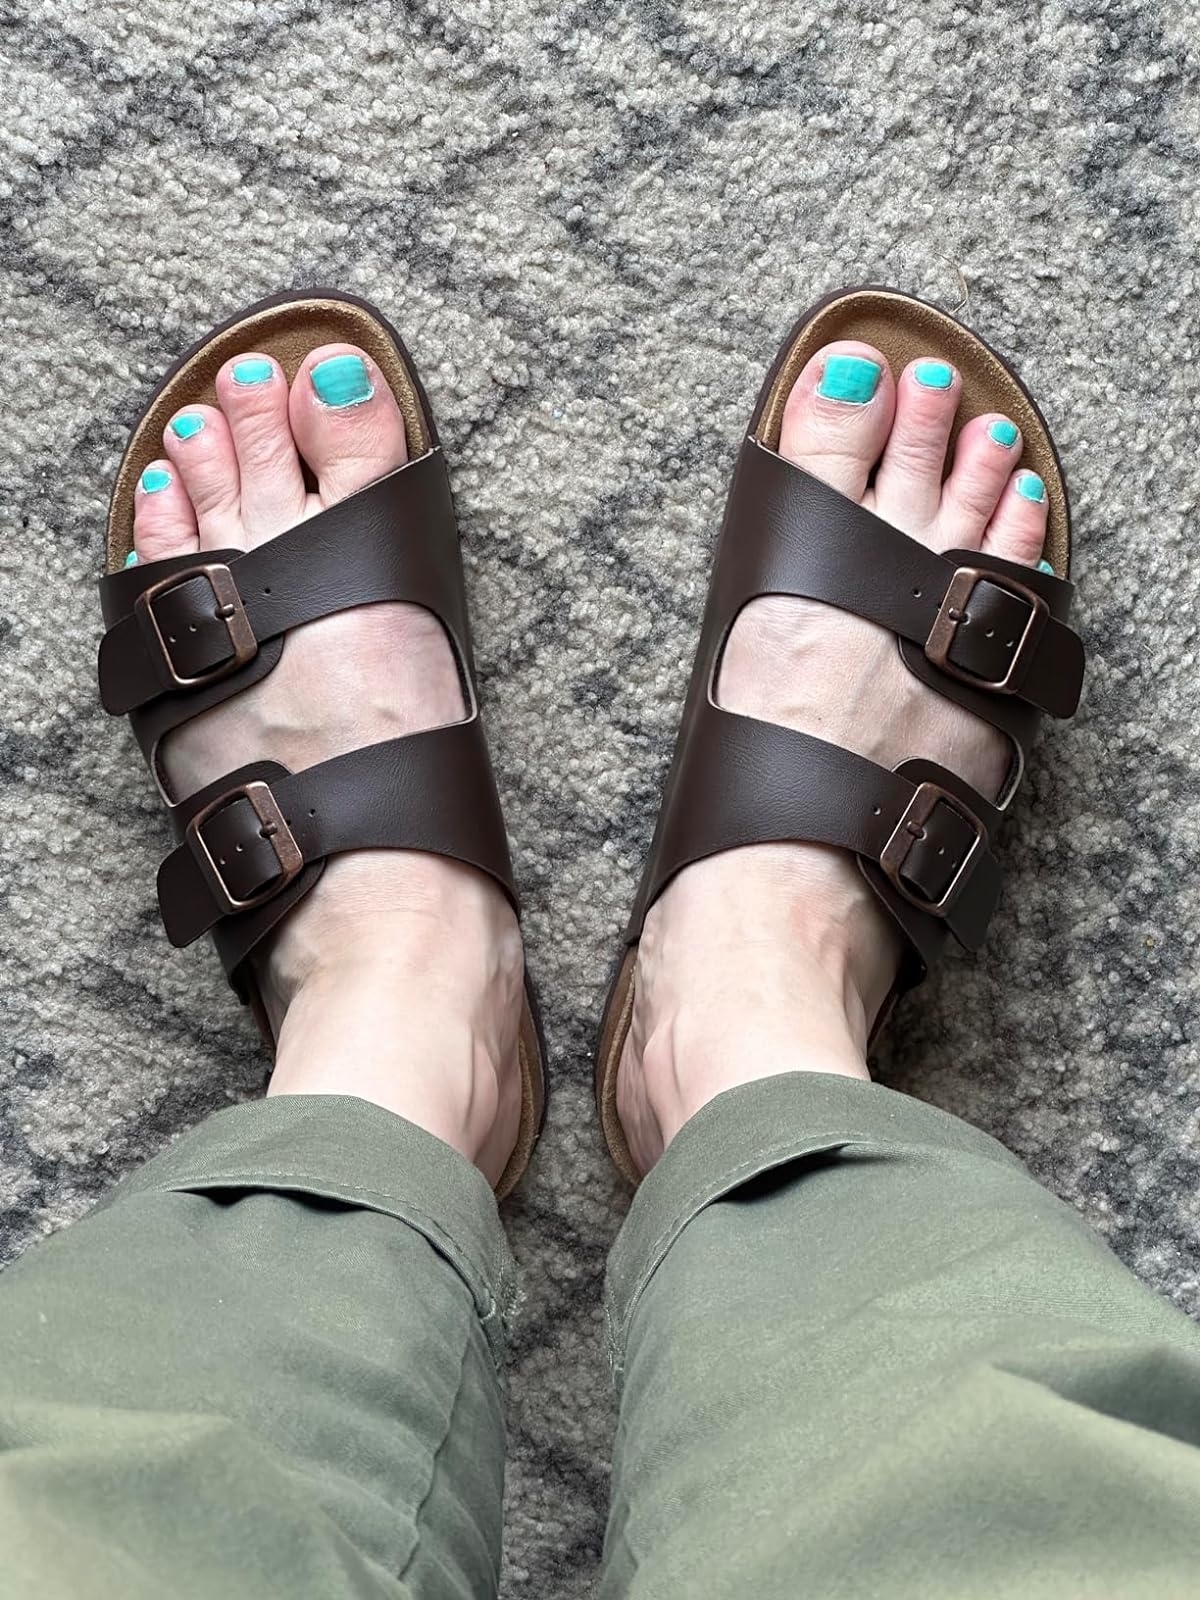 Person wearing brown two-strap sandals and green pants, with blue-painted toenails, standing on a textured surface